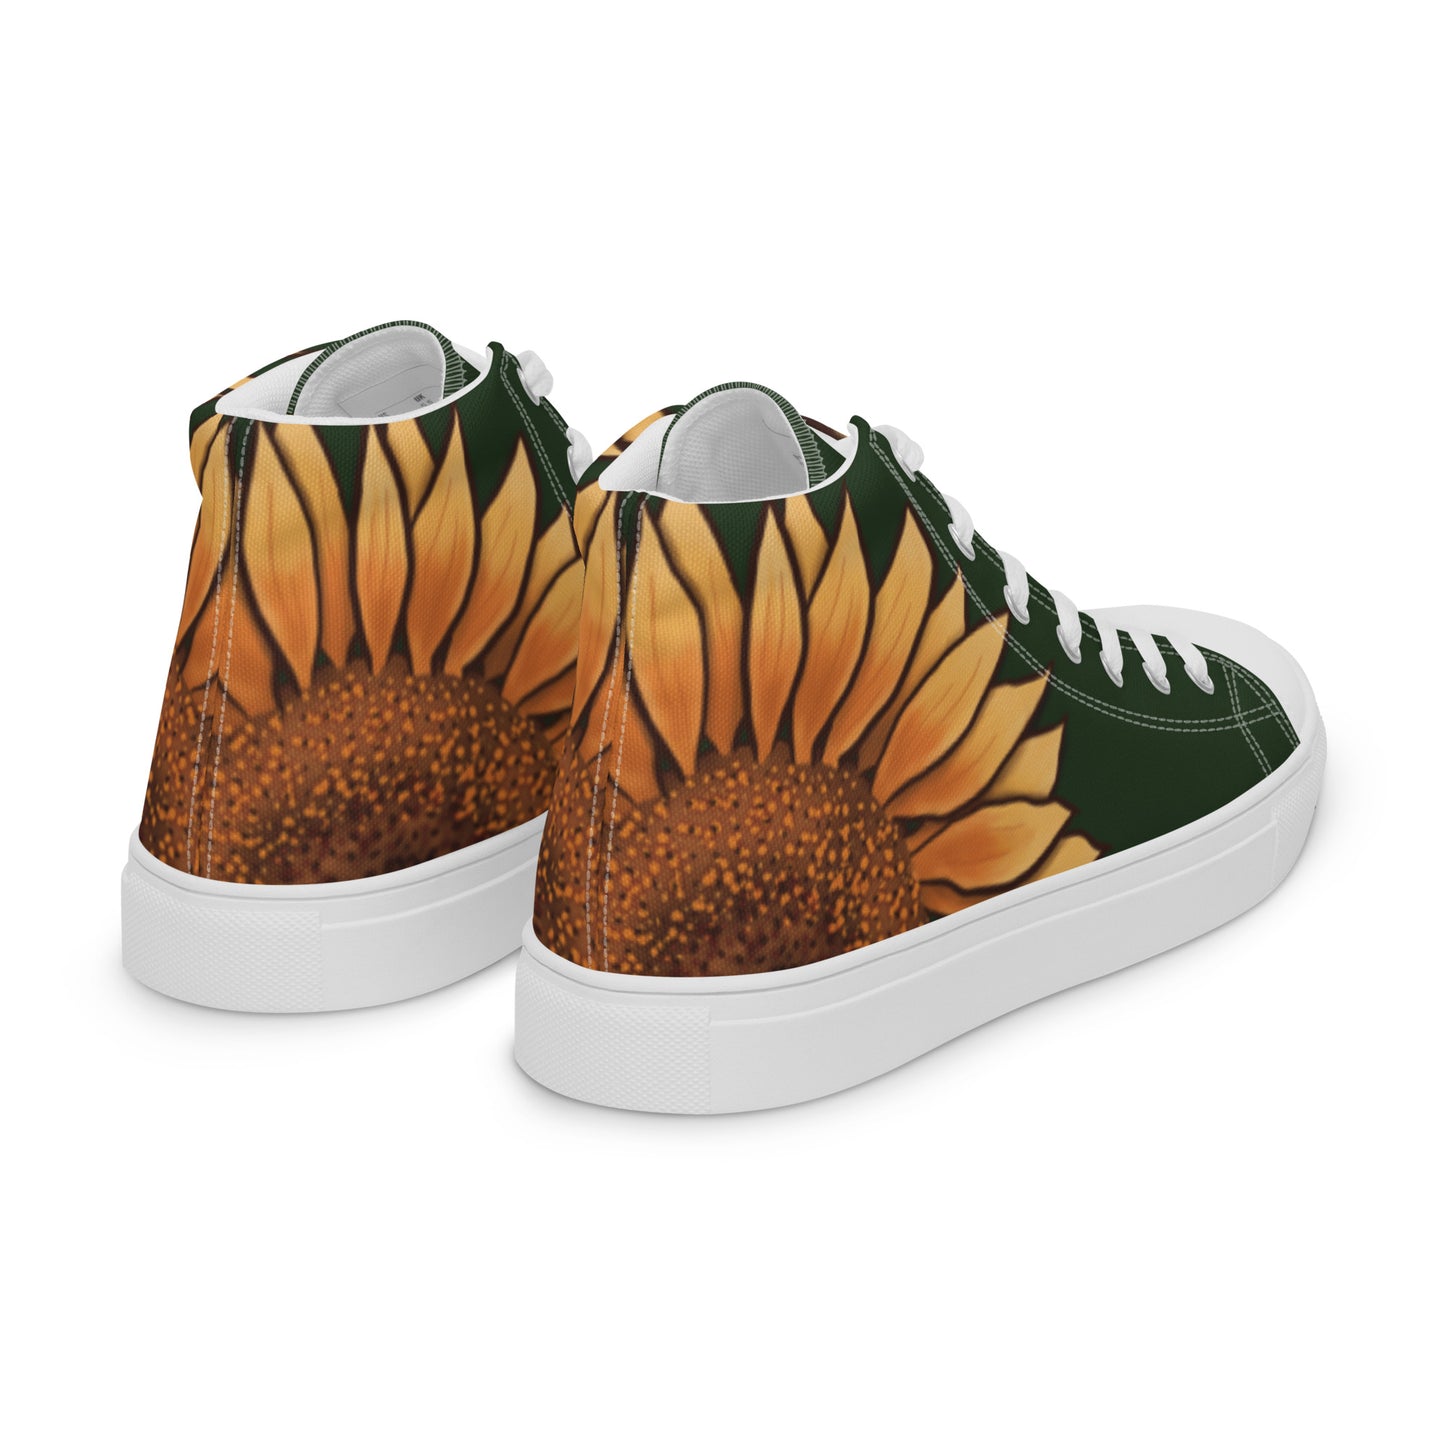 Right back view: a pair of high top shoes with a large sunflower on the heel and a forest green background.